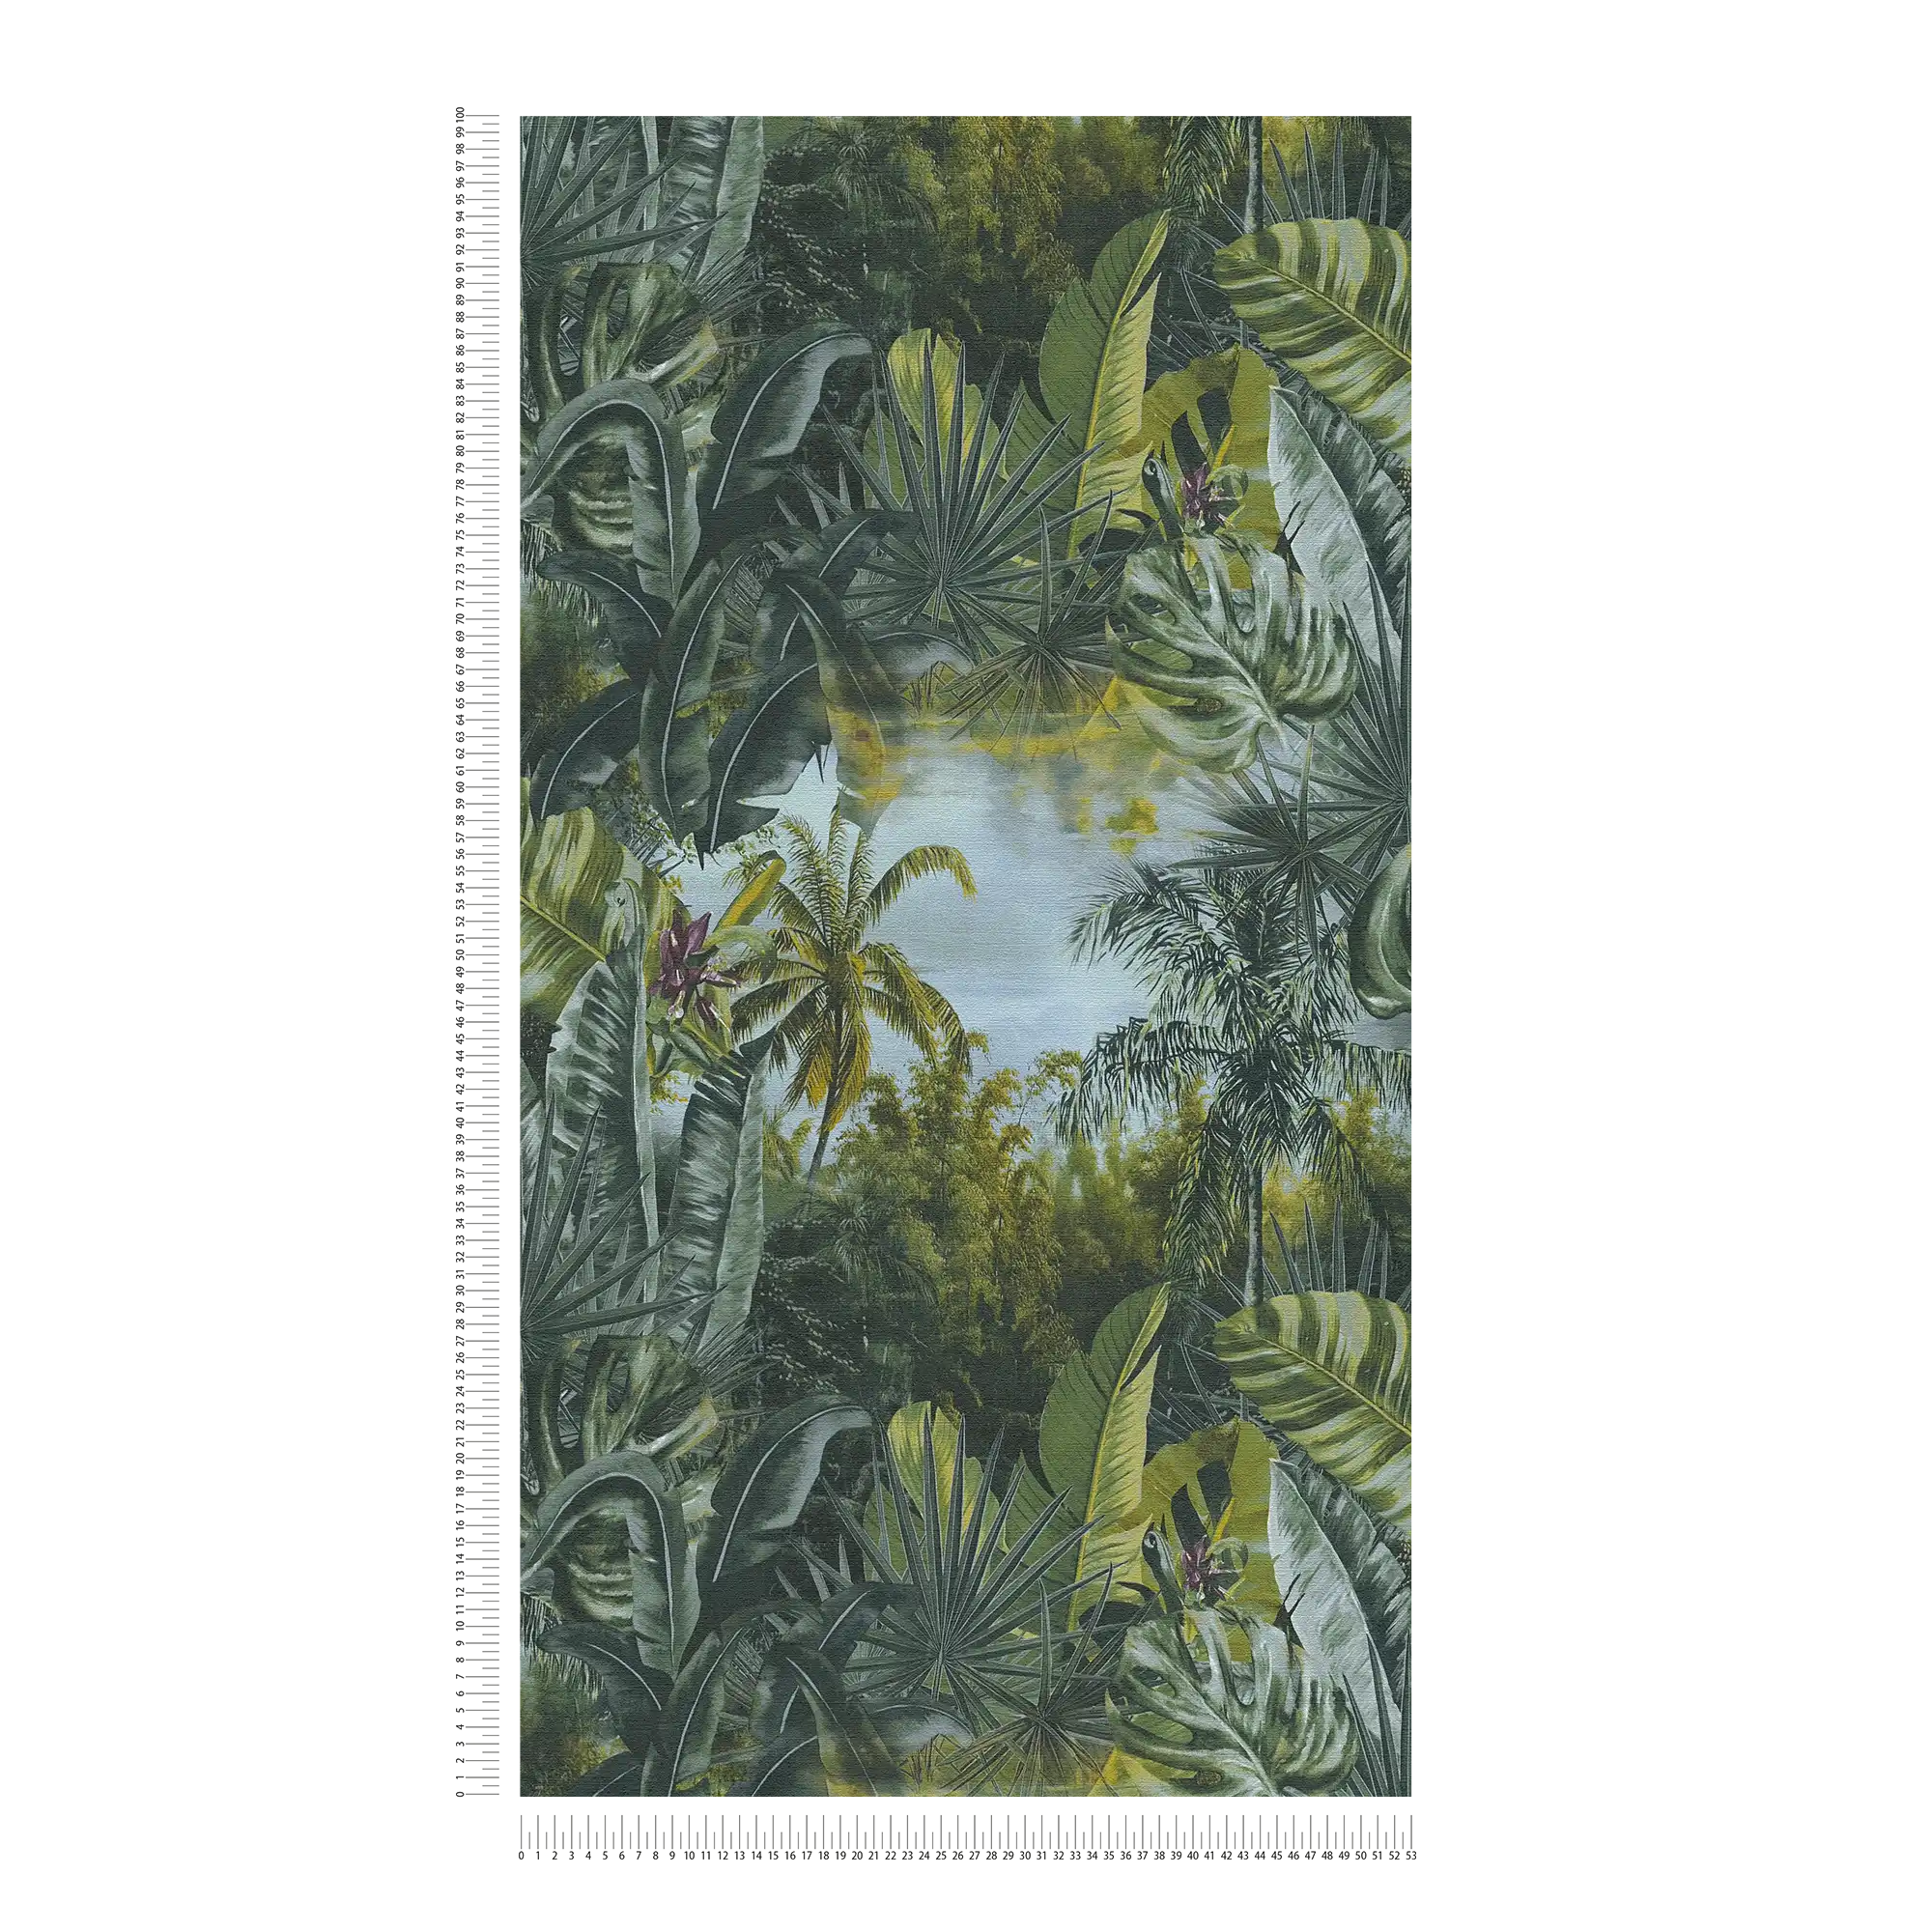             Non-woven wallpaper jungle with palm trees & leaves design - green
        